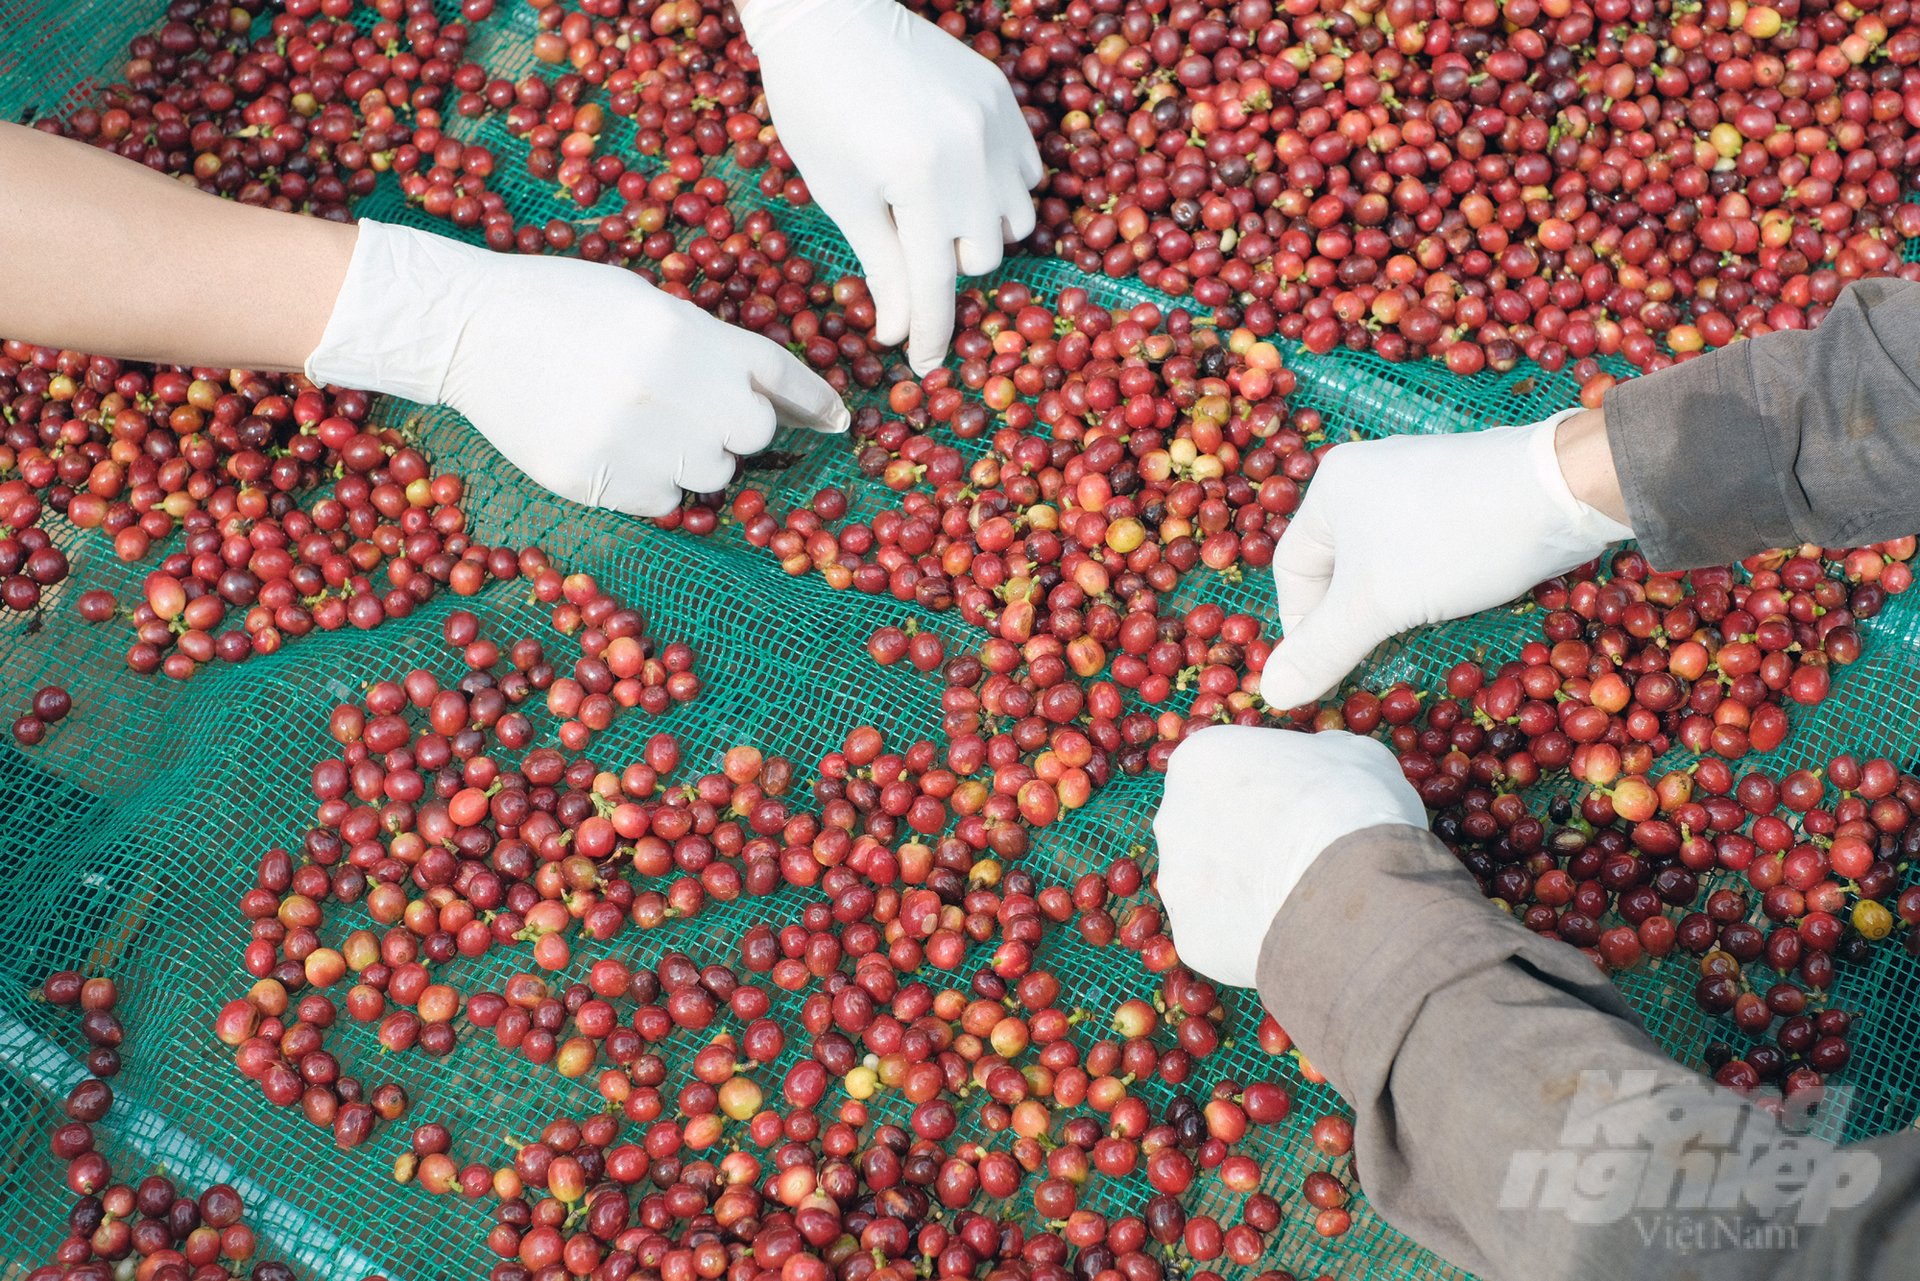 Khe Sanh Arabica coffee products are available in various fastidious markets around the world. Photo: Vo Dung.